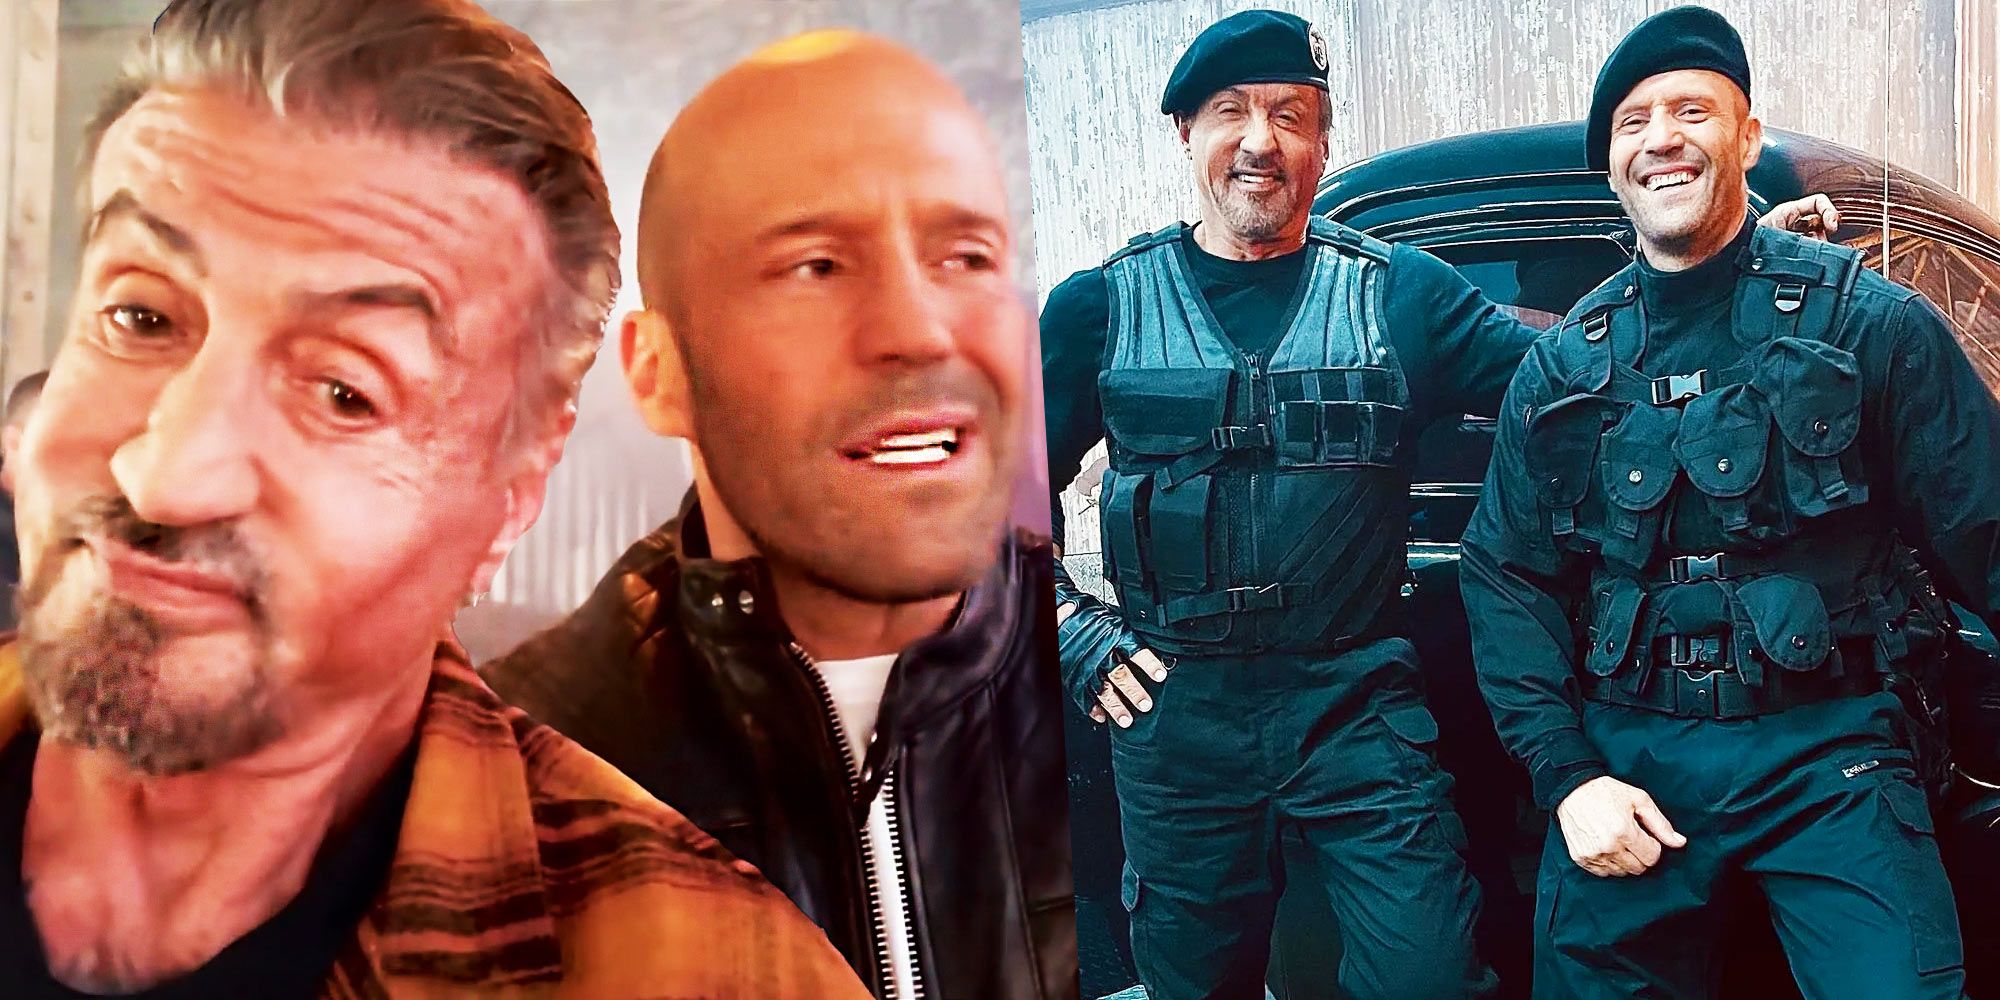 Sylvester Stallone posts cheeky video with Jason Statham from The Expendables 4 set